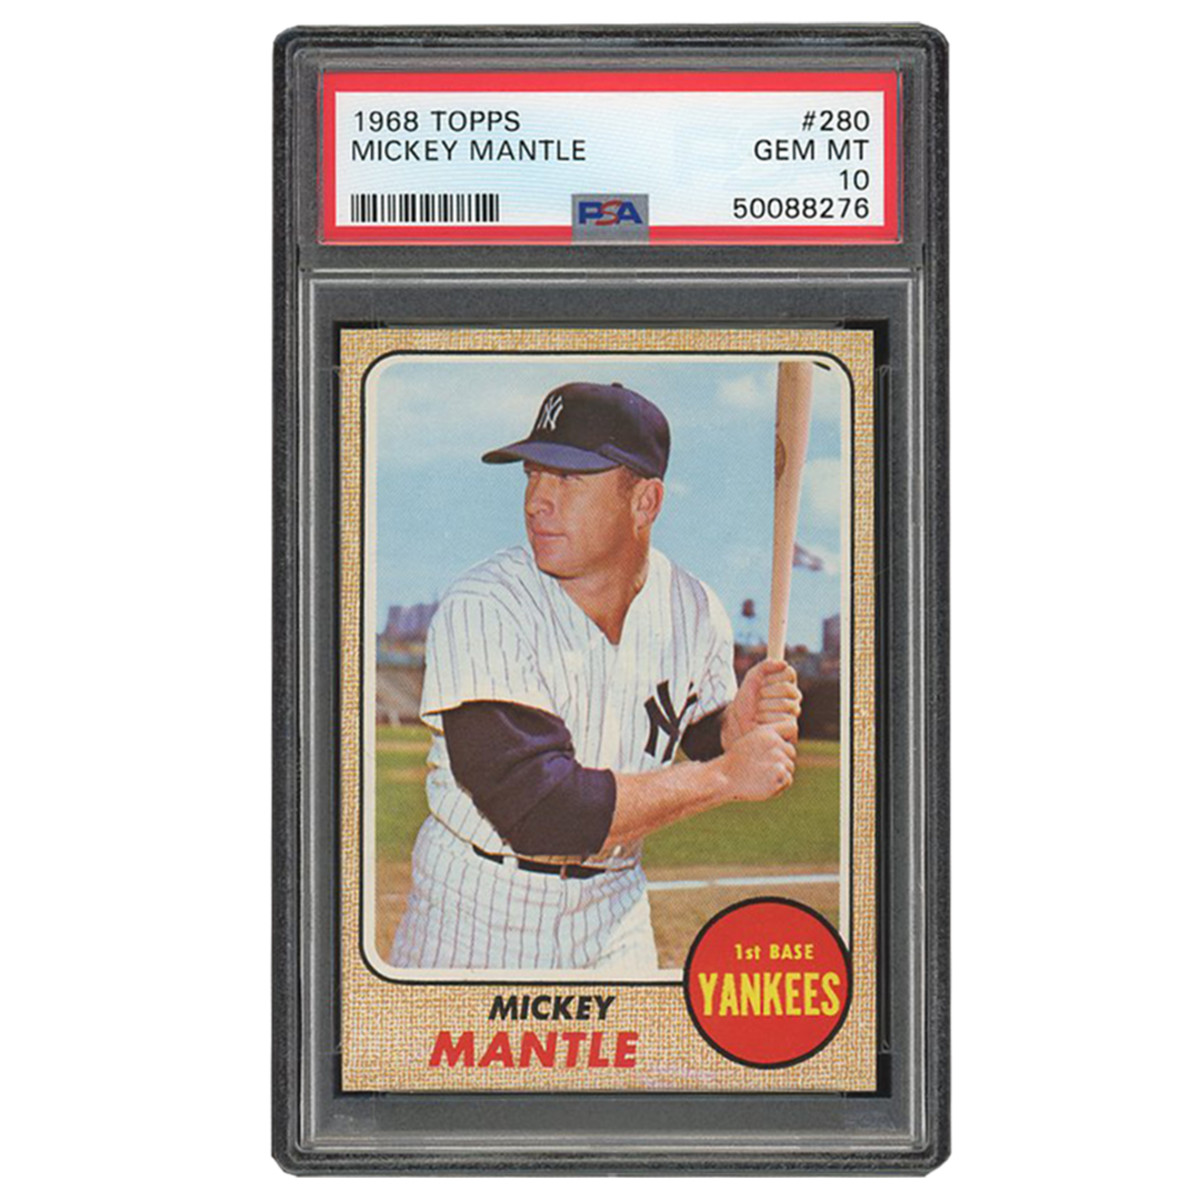 1968 Topps Mickey Mantle card.